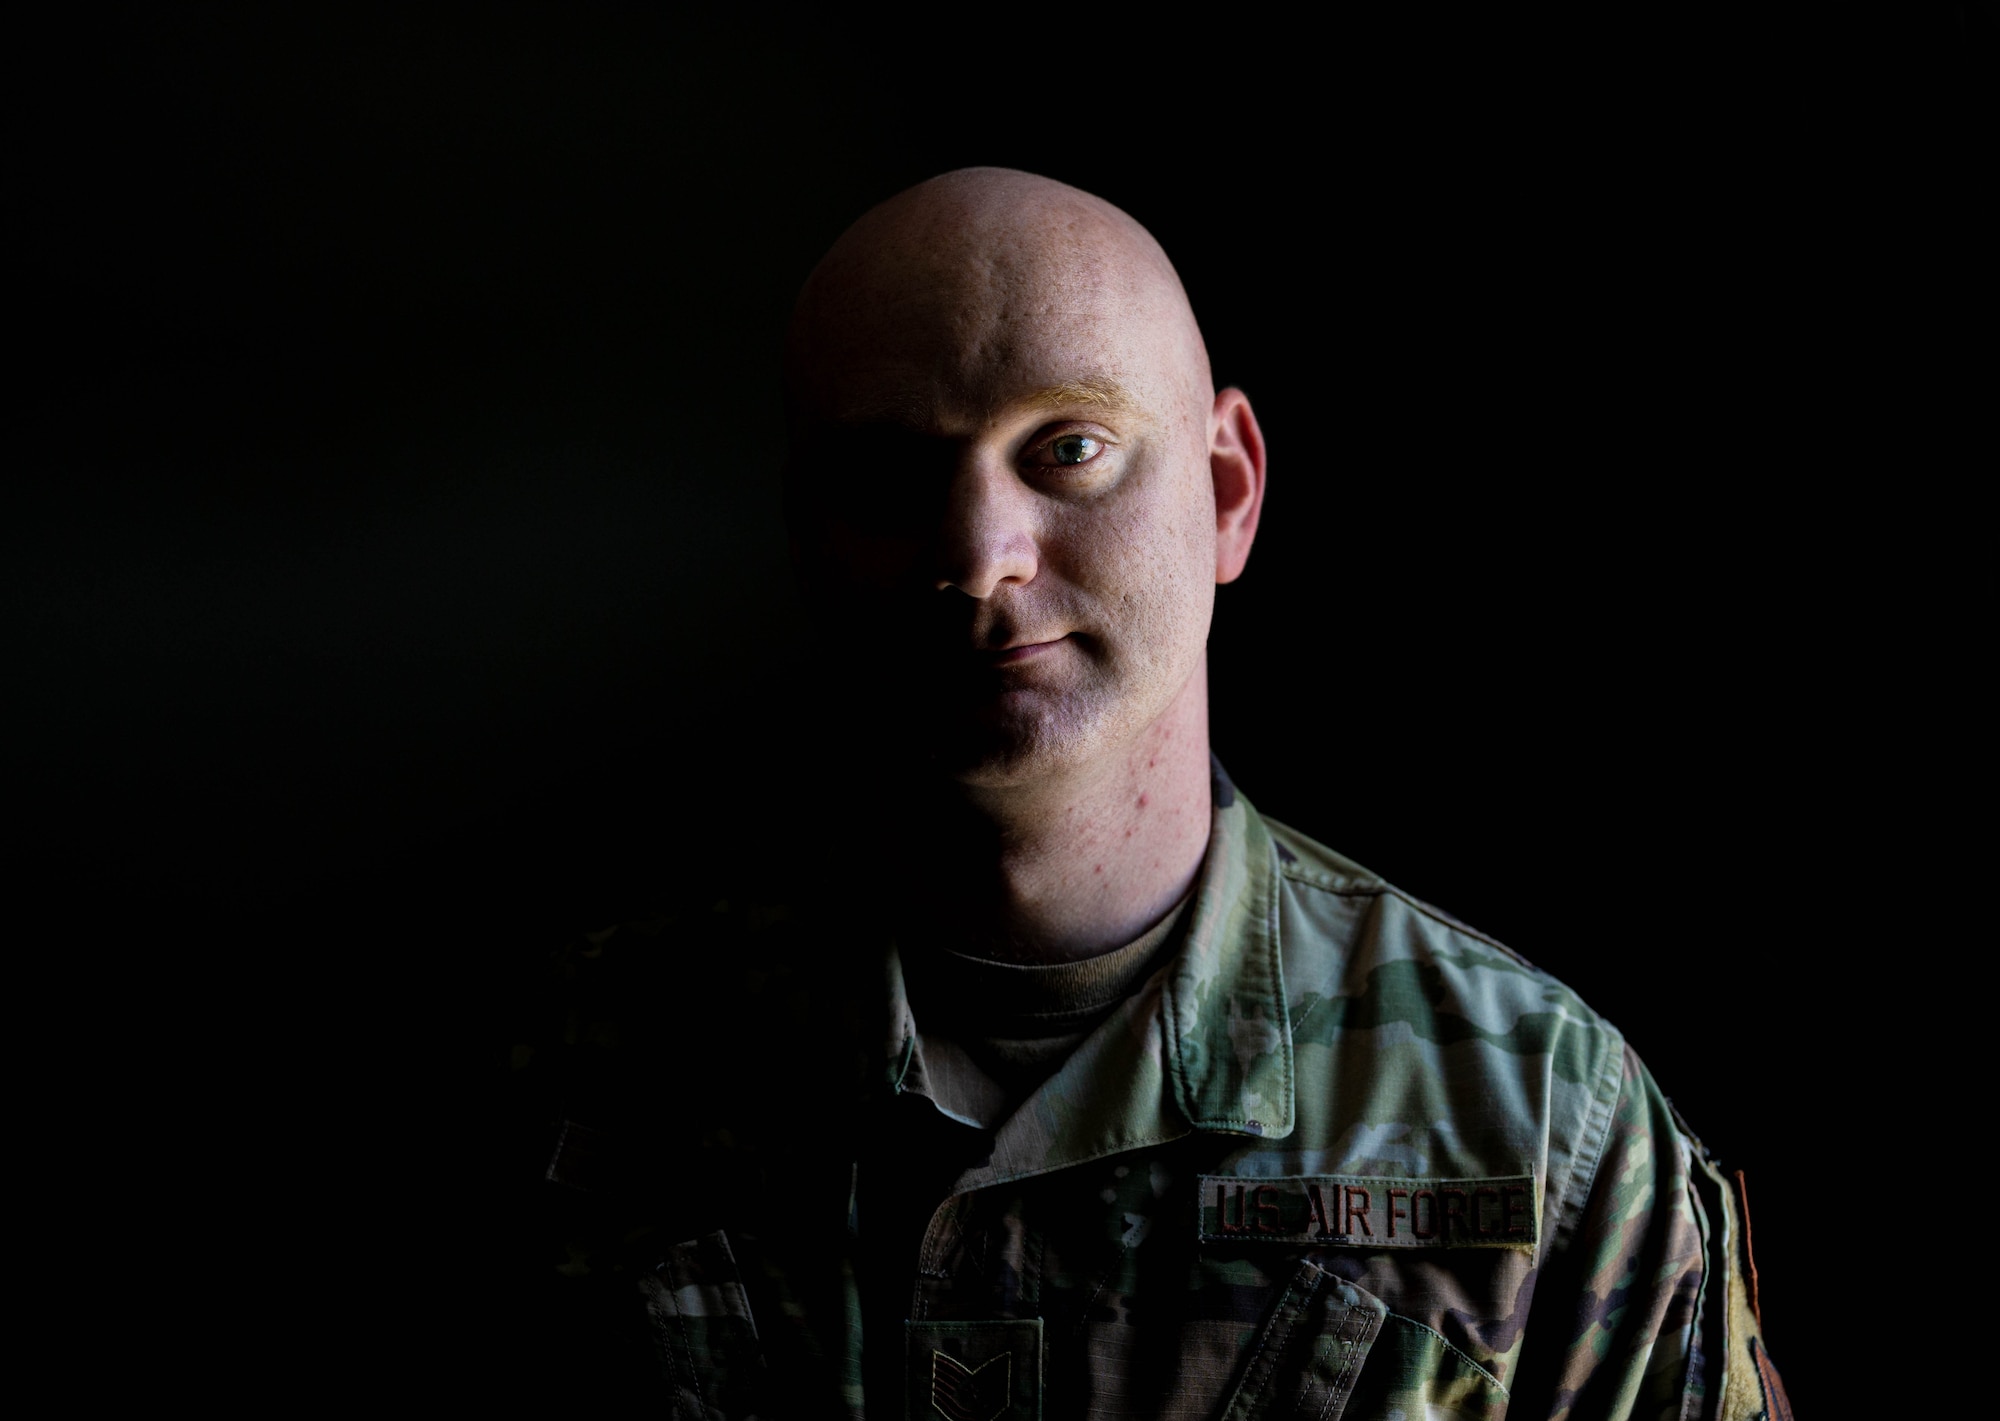 An Airman poses for a photo in a dark room with light shining on one half of his face